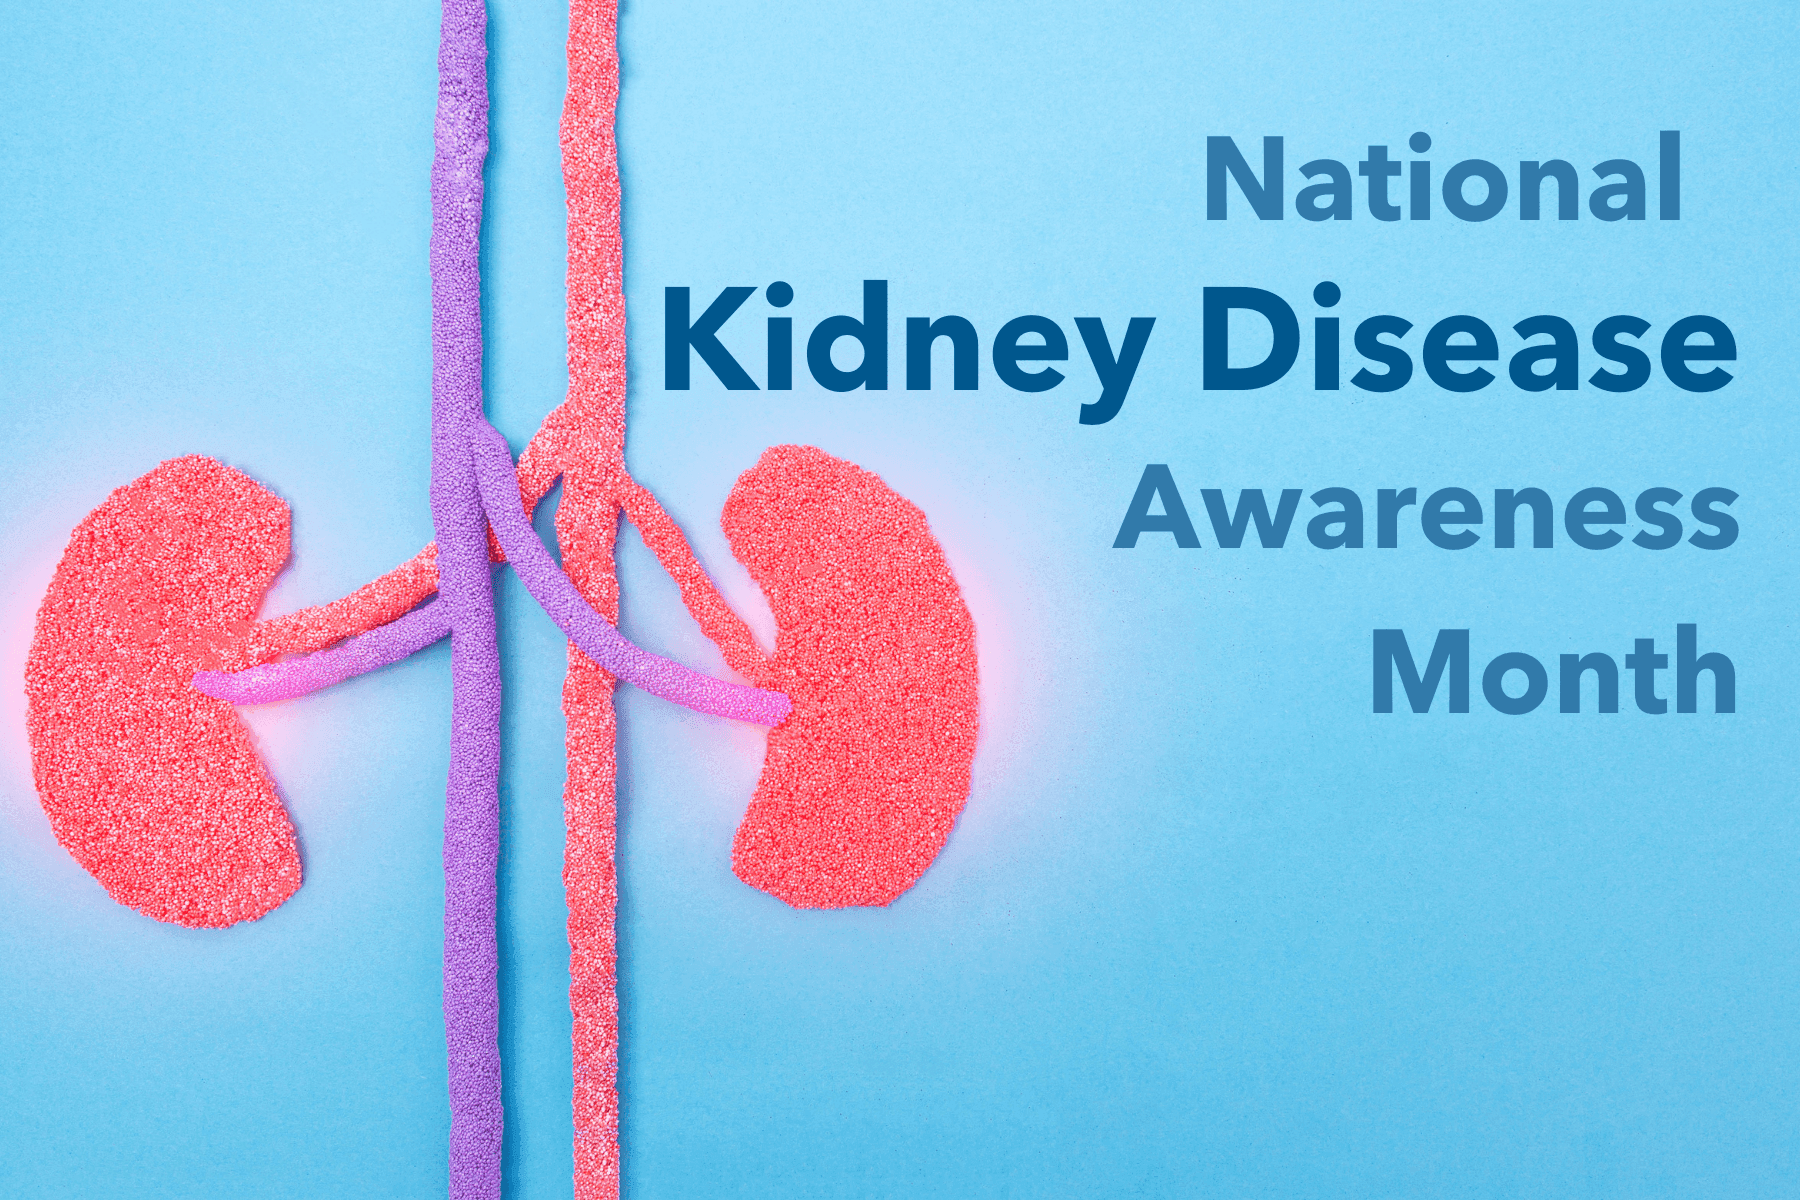 March is Kidney Disease Awareness Month